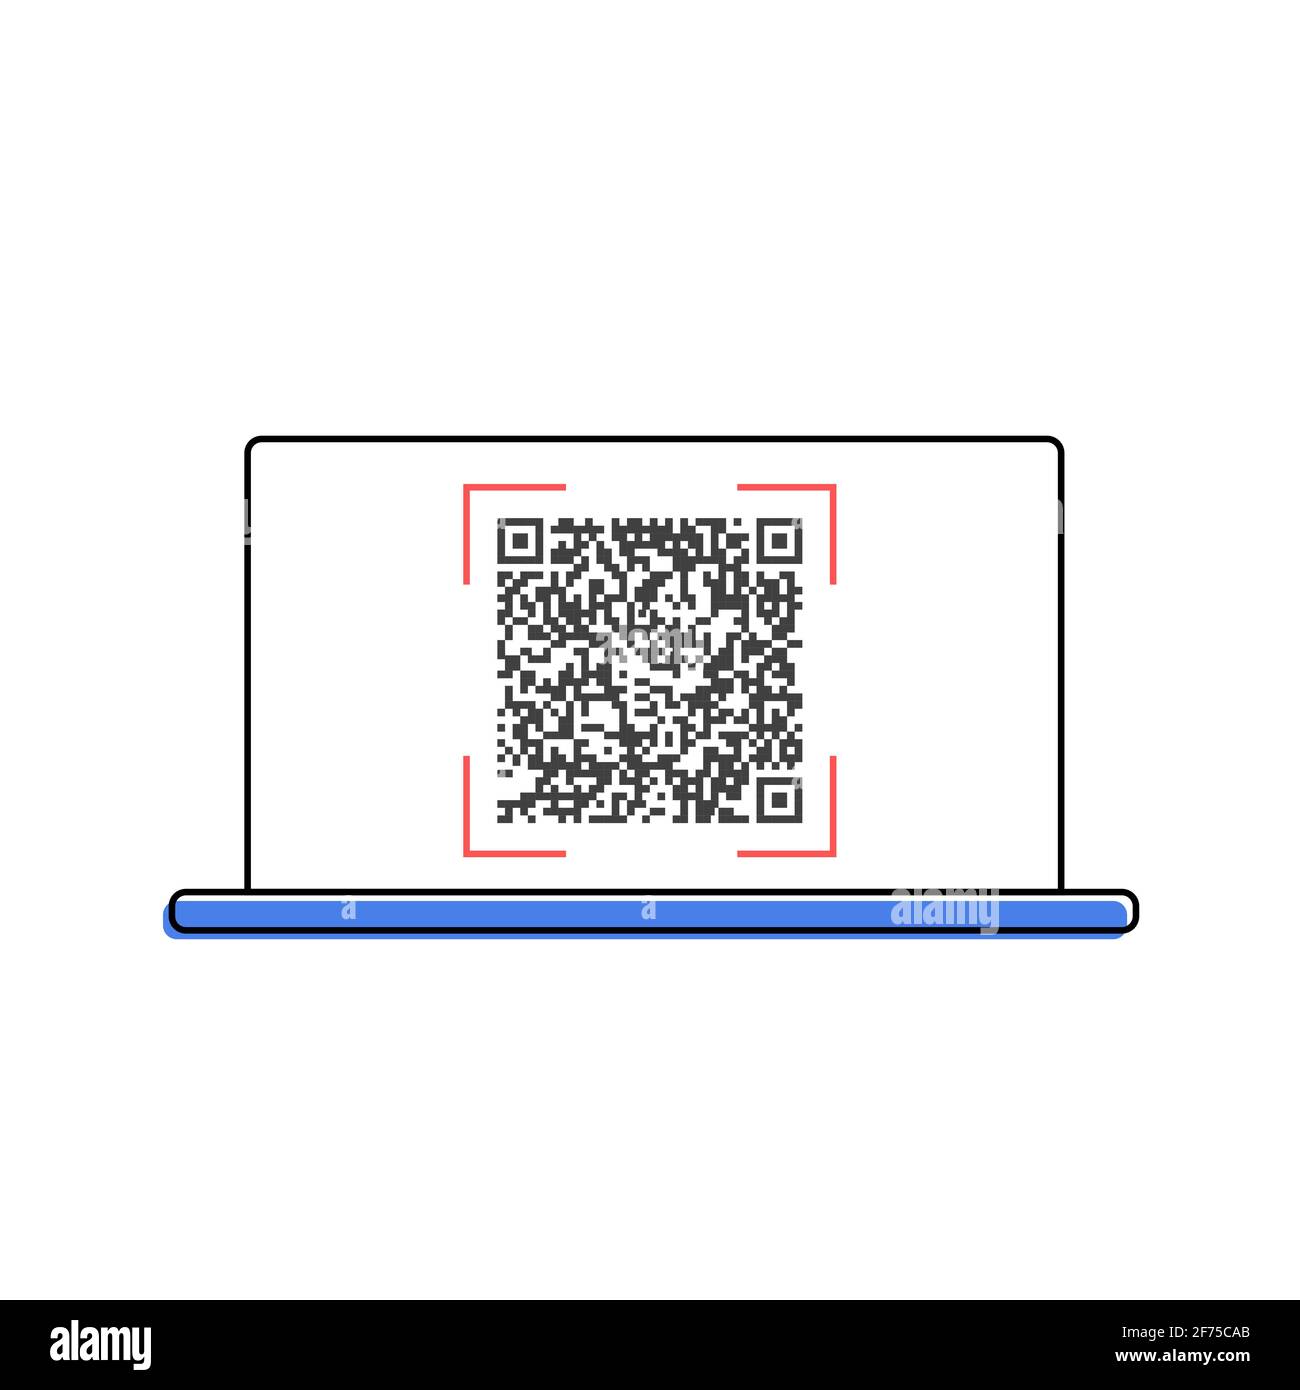 Business icons and techniques - QR Codes on laptop Stock Vector